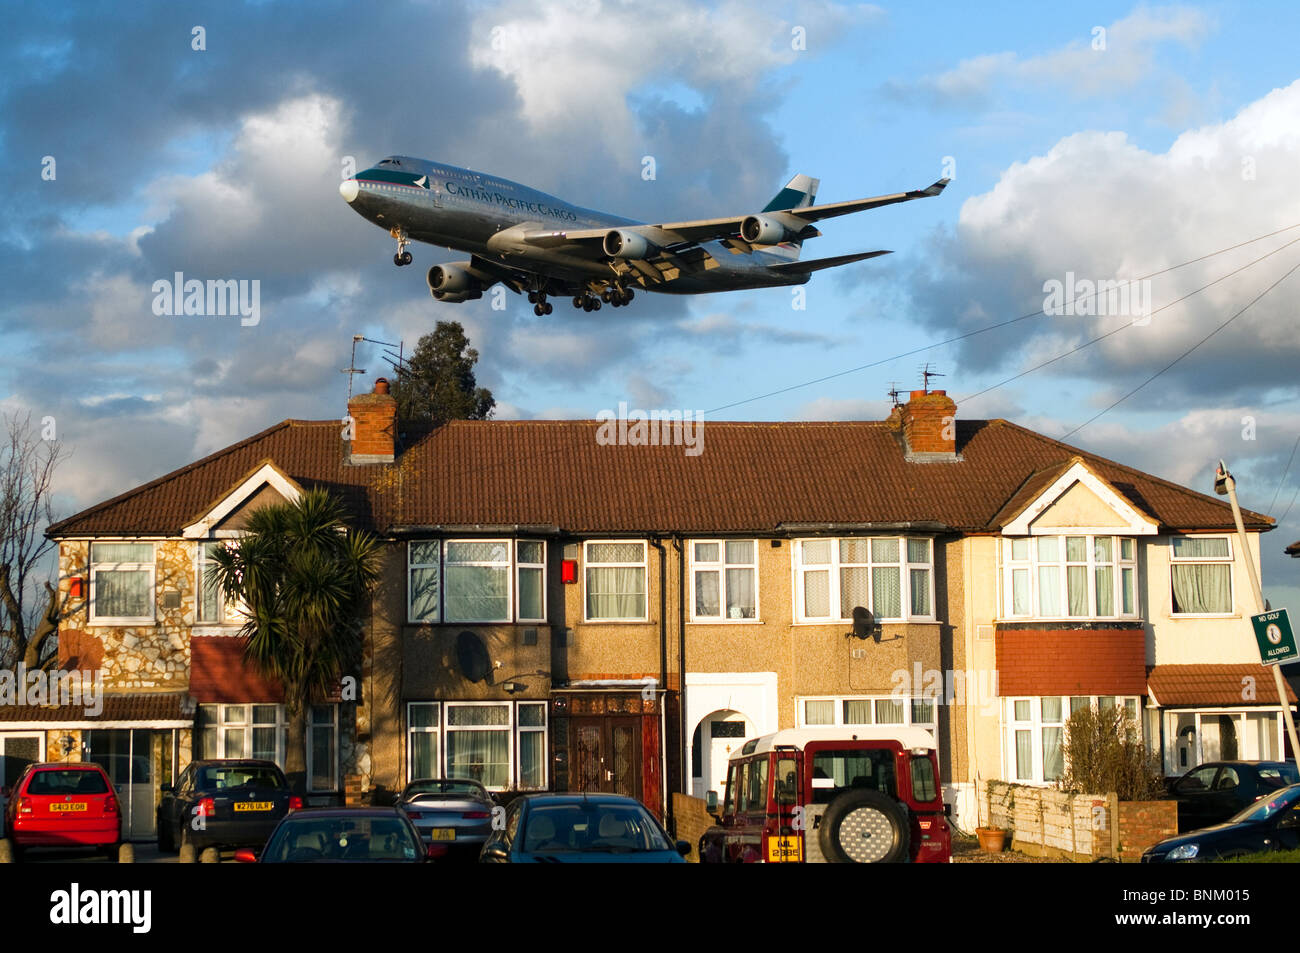 Heathrow runway approach by Boeing 747, Cathay Pacific Cargo, landing at London Heathrow Airport, UK. Myrtle Avenue houses in foregound. Stock Photo